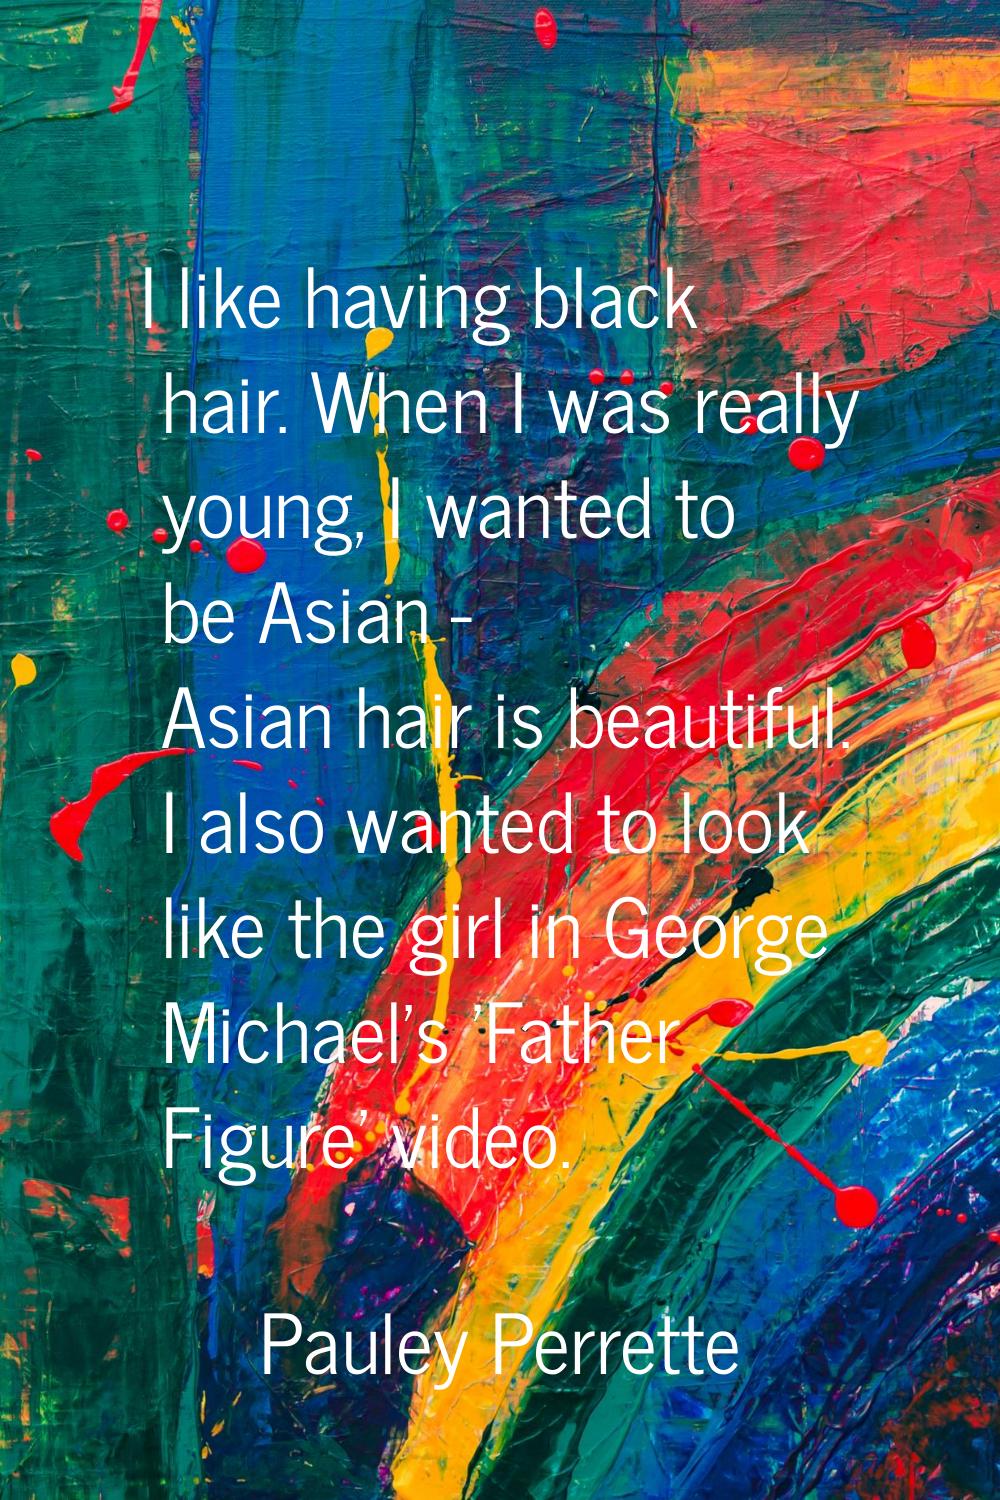 I like having black hair. When I was really young, I wanted to be Asian - Asian hair is beautiful. 